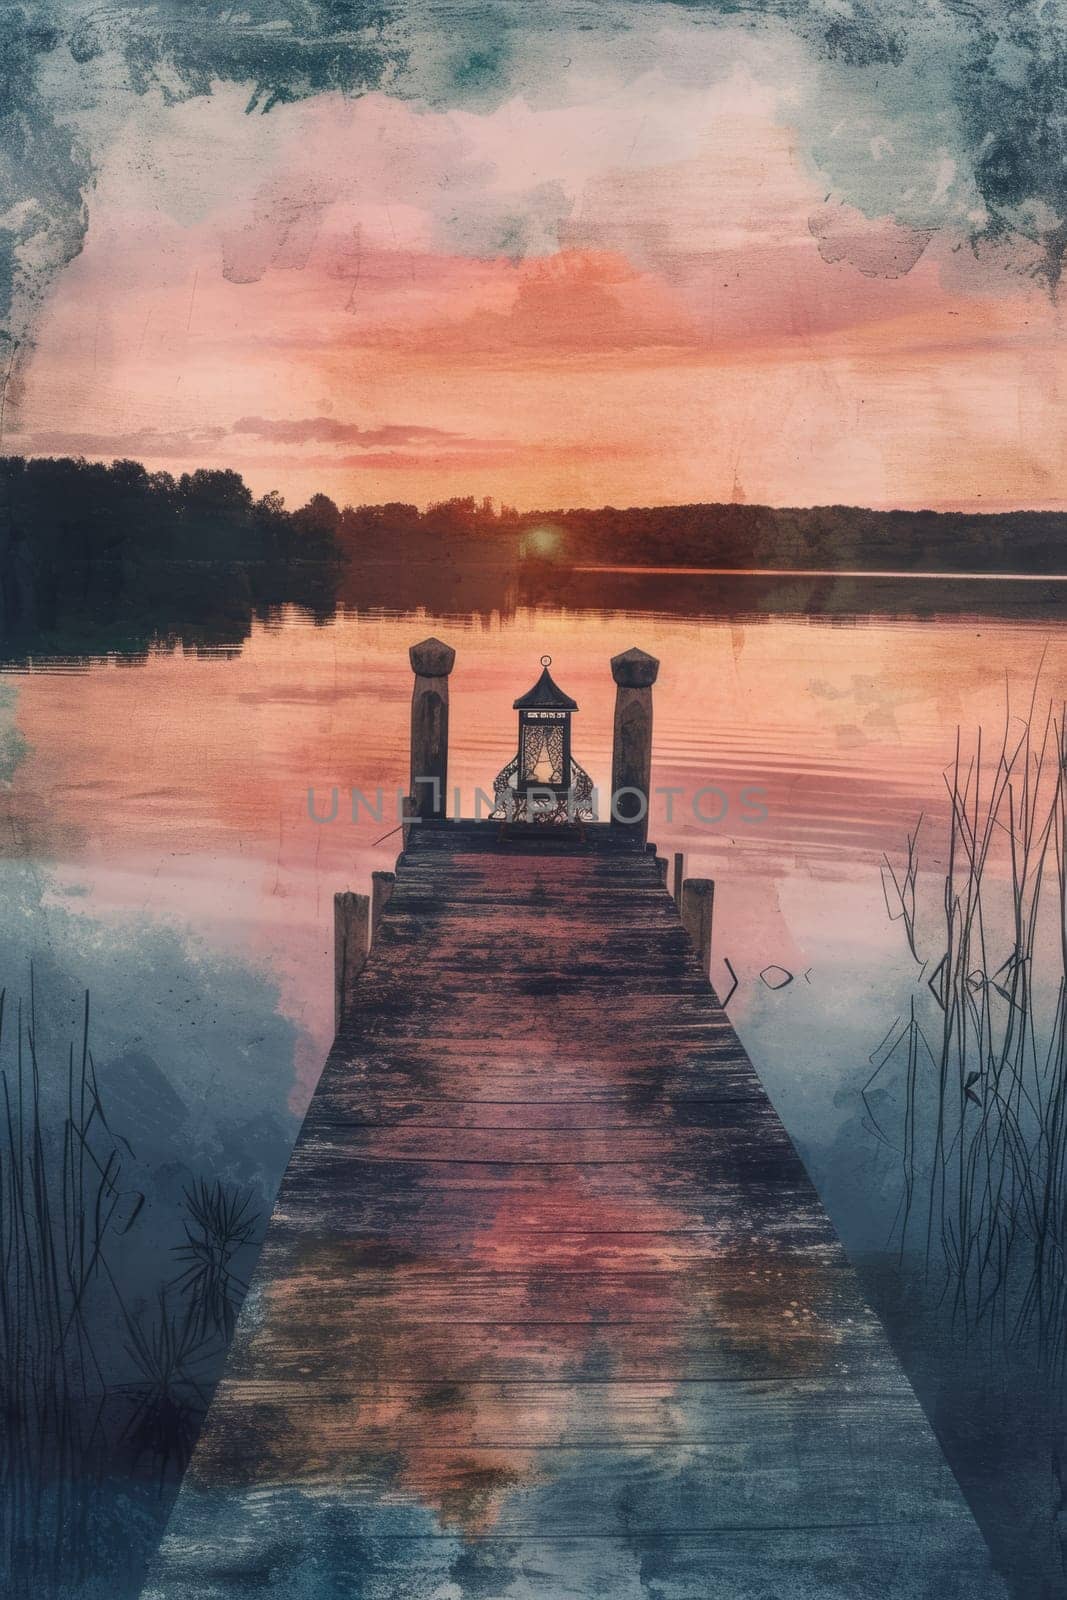 Calm sunset over a serene lake viewed from an old wooden pier with a solitary lantern